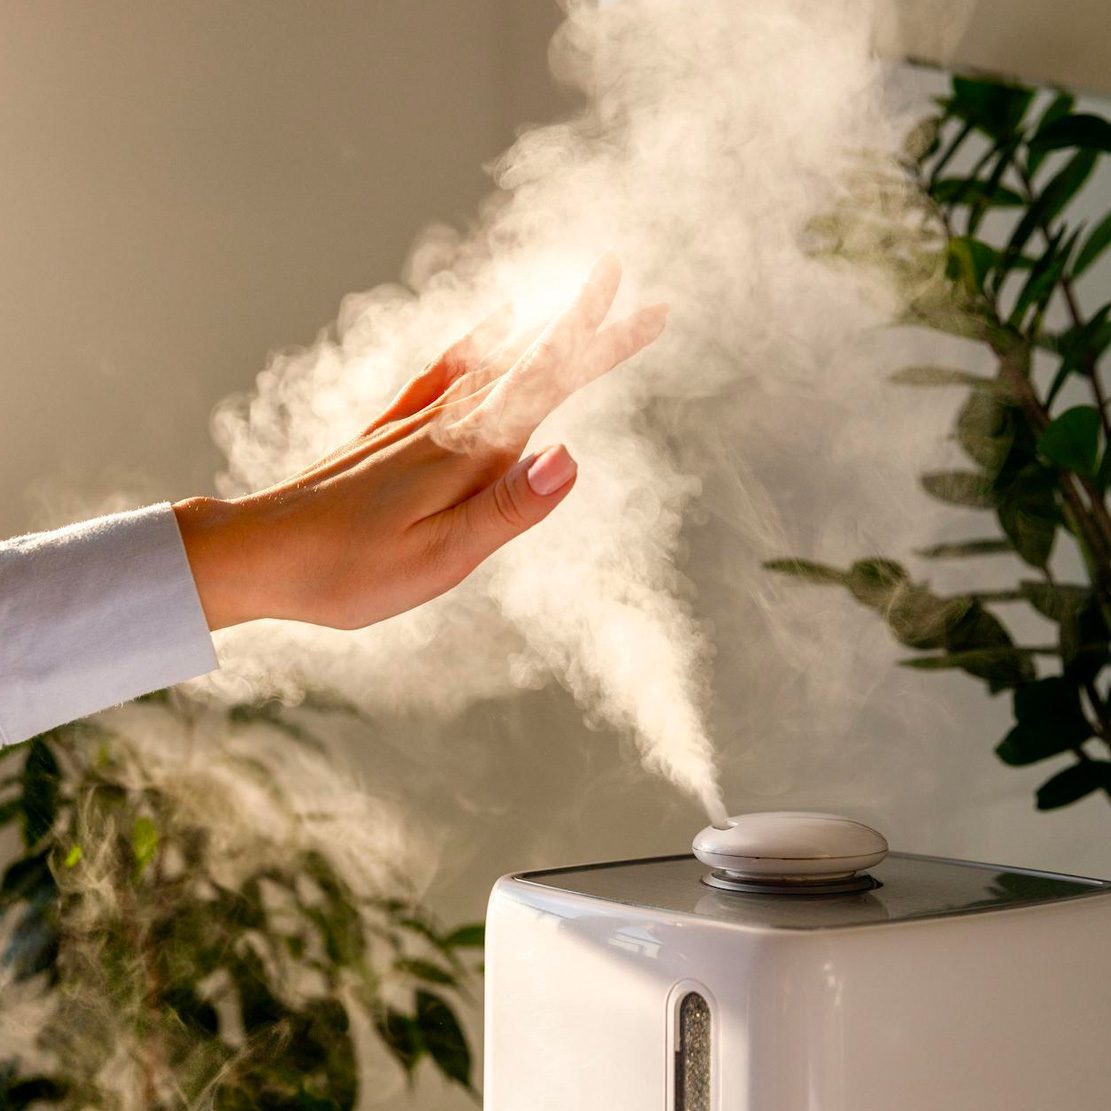 What is a Humidifier?